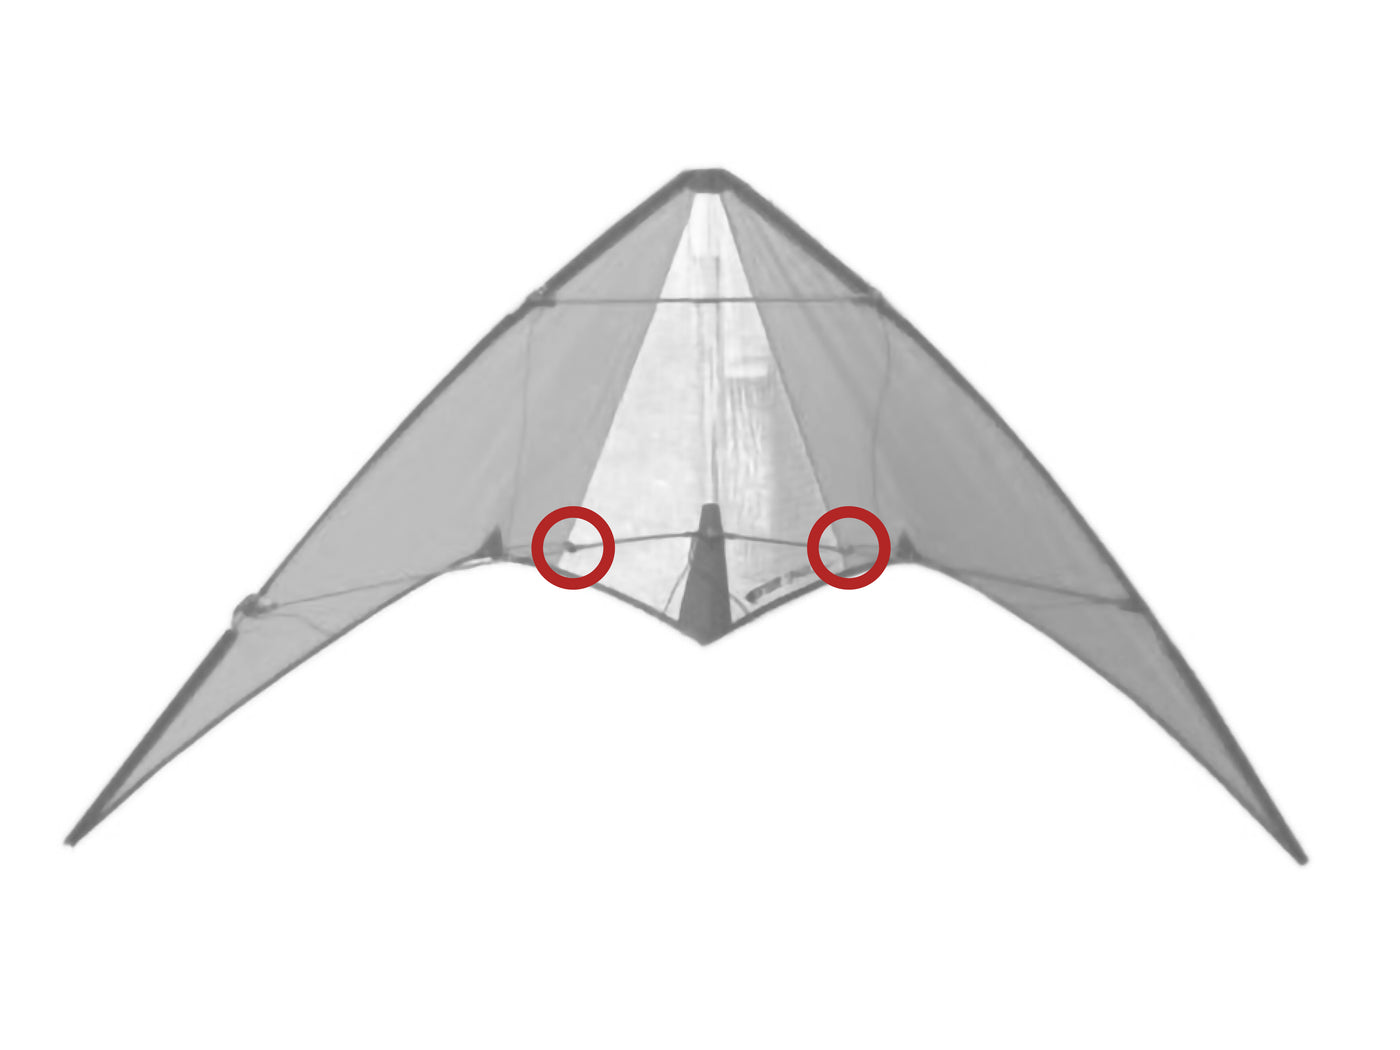 Diagram showing location of the Spark (Carbon) Standoff Fittings on the kite.